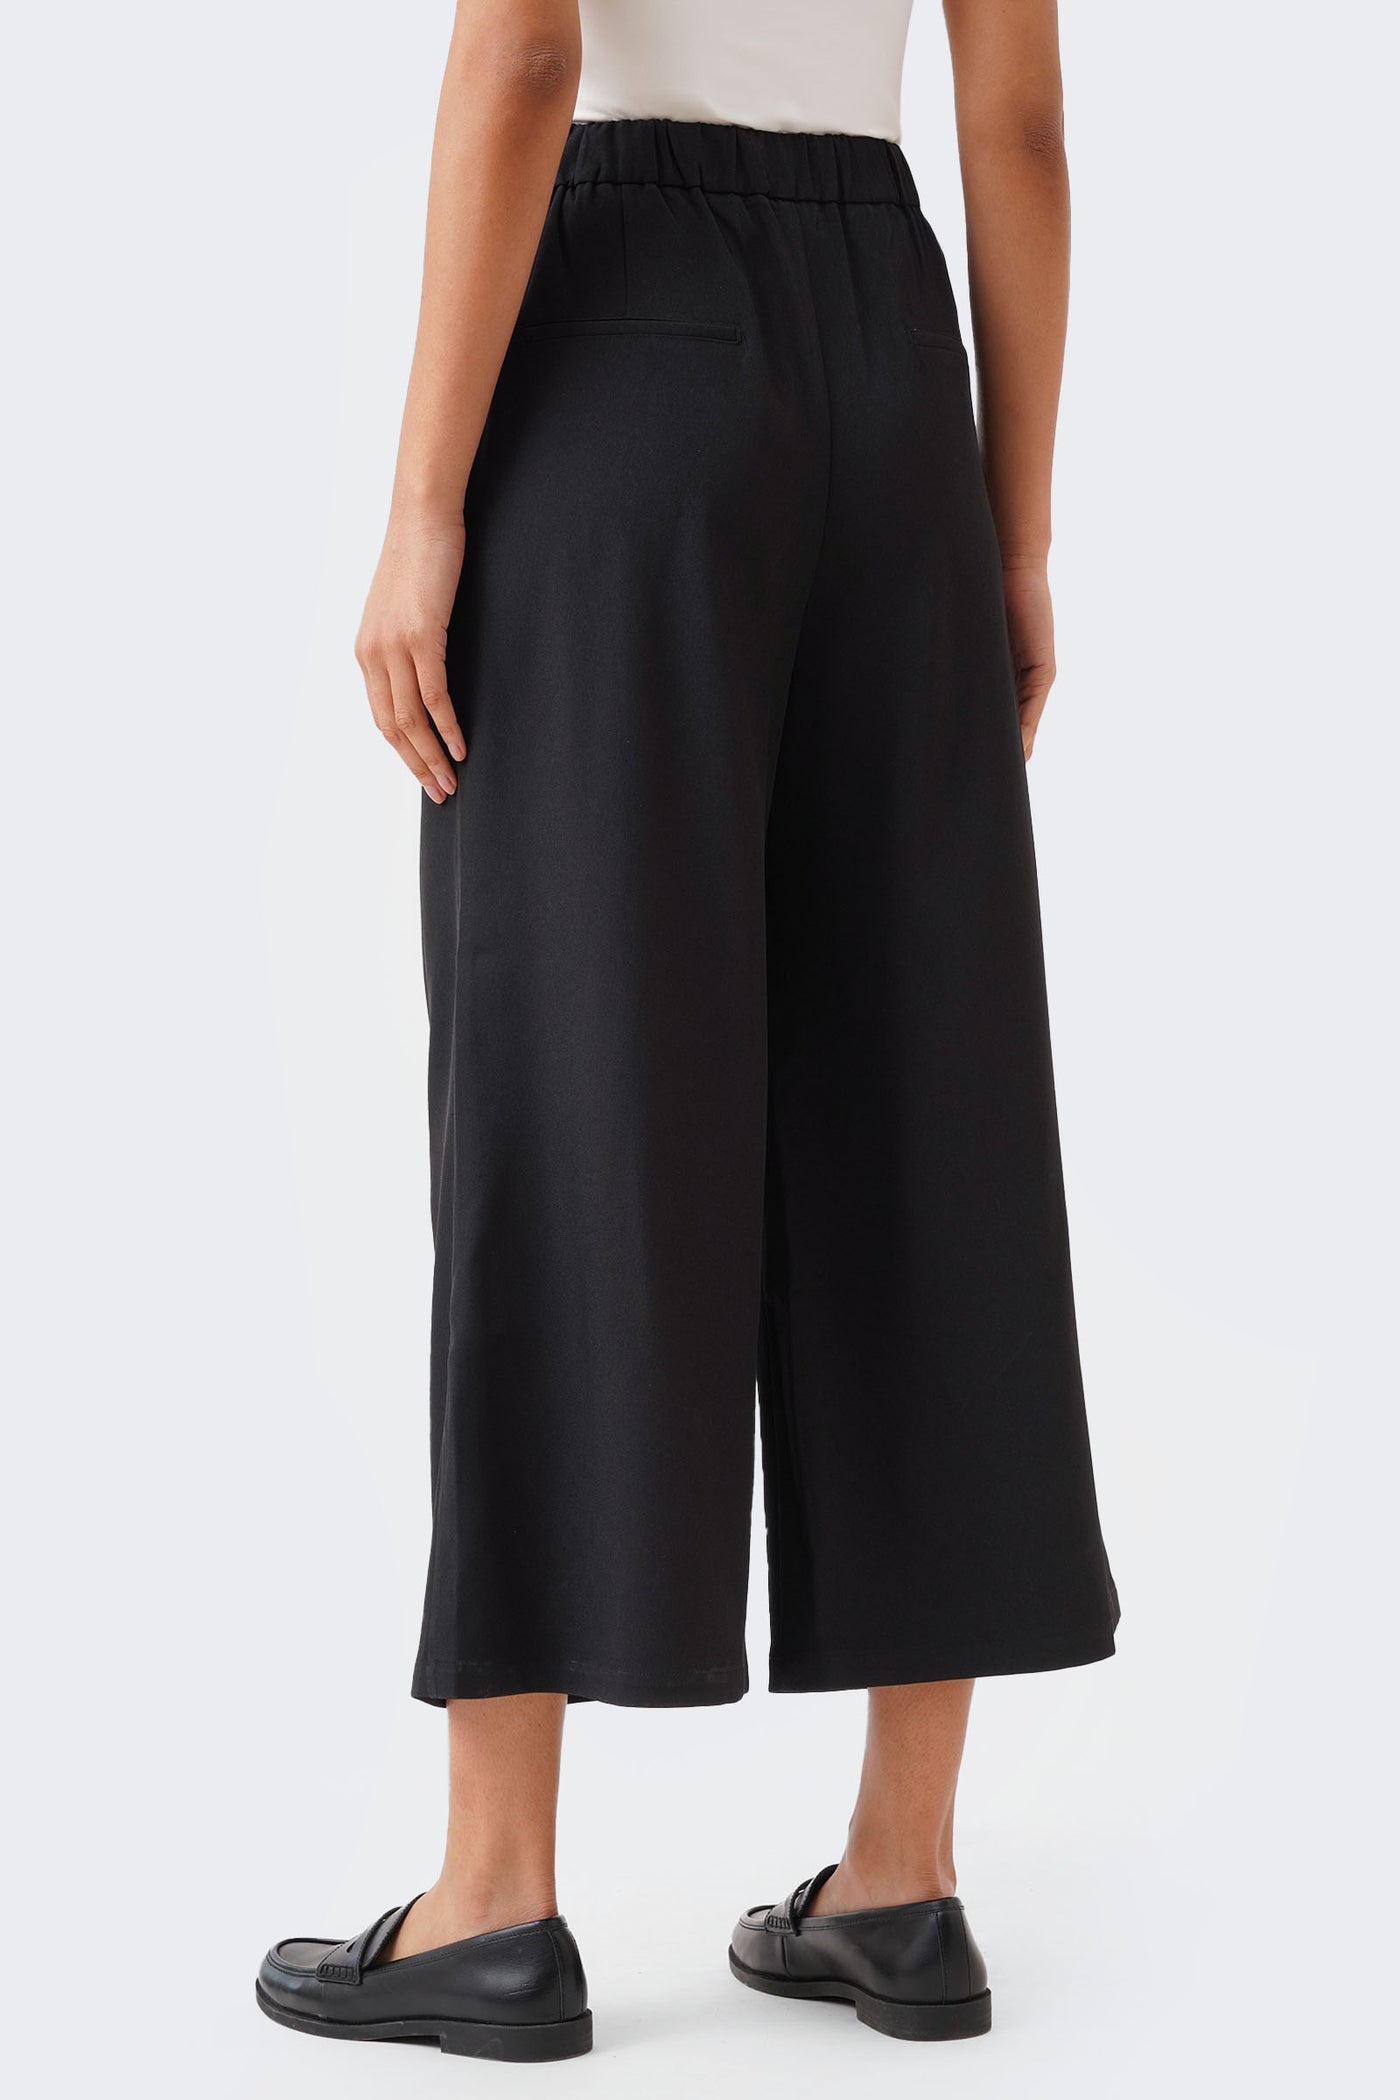 Women's Pleated Culottes